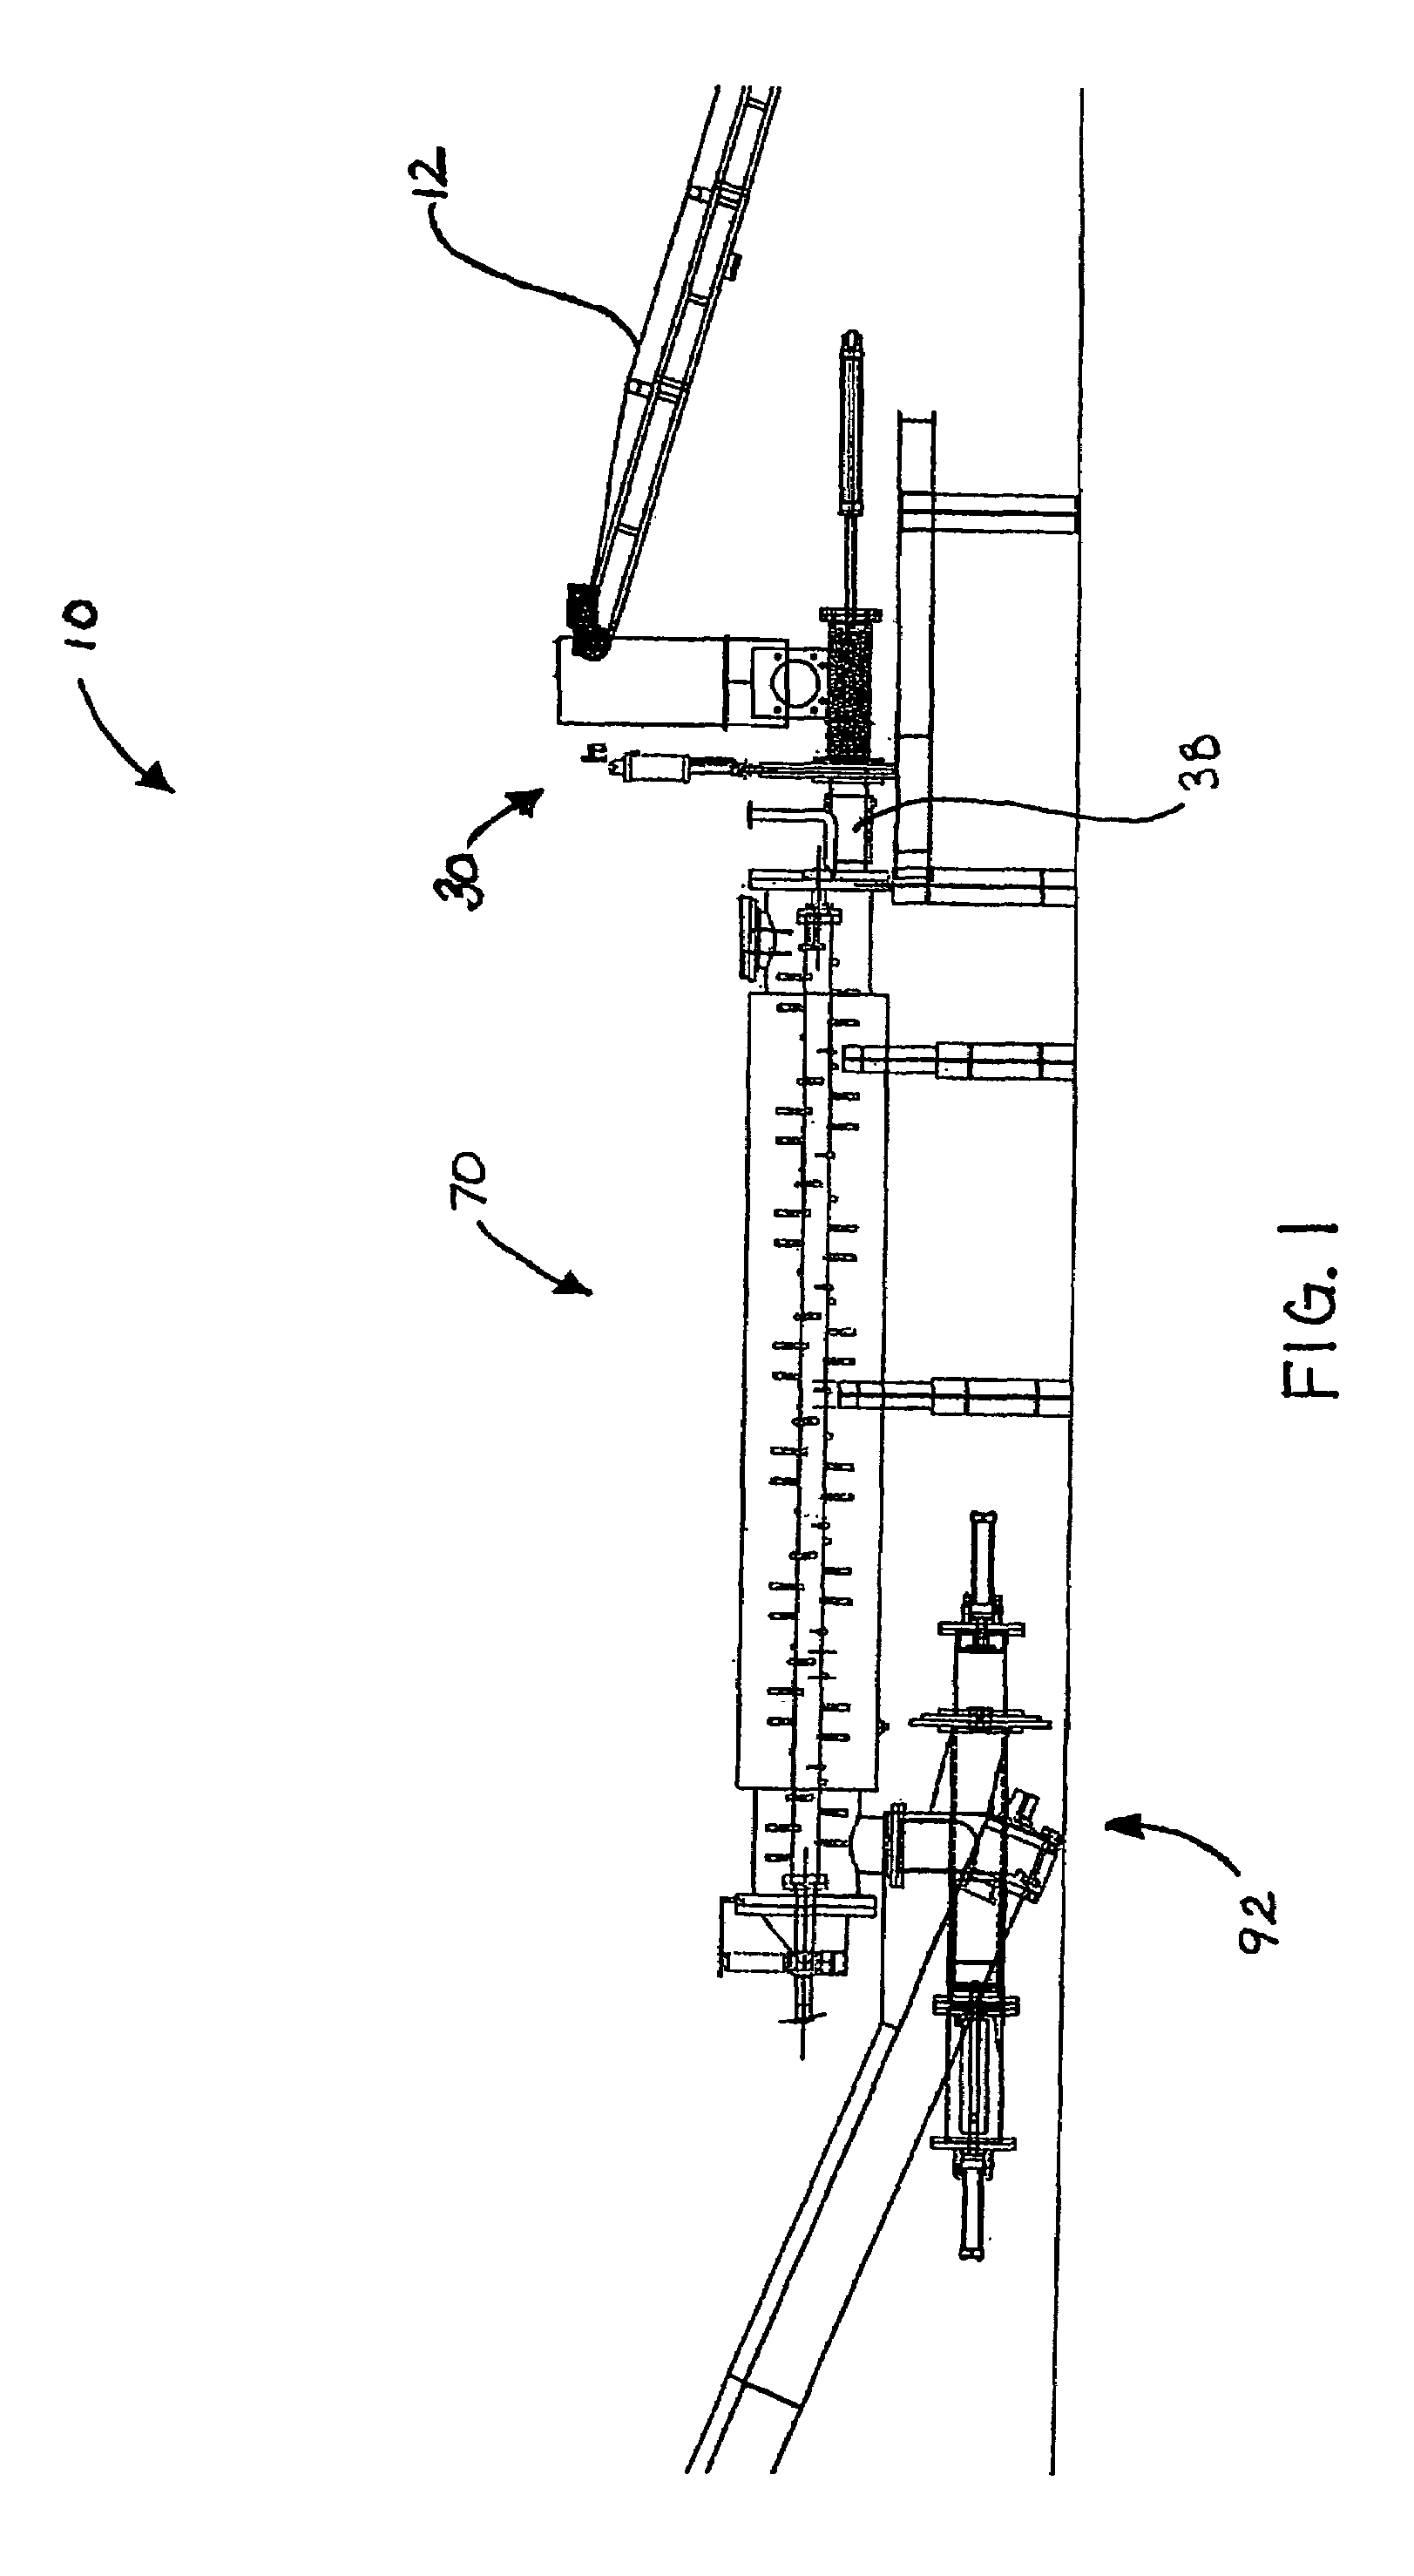 System and method for processing waste on a continuous basis